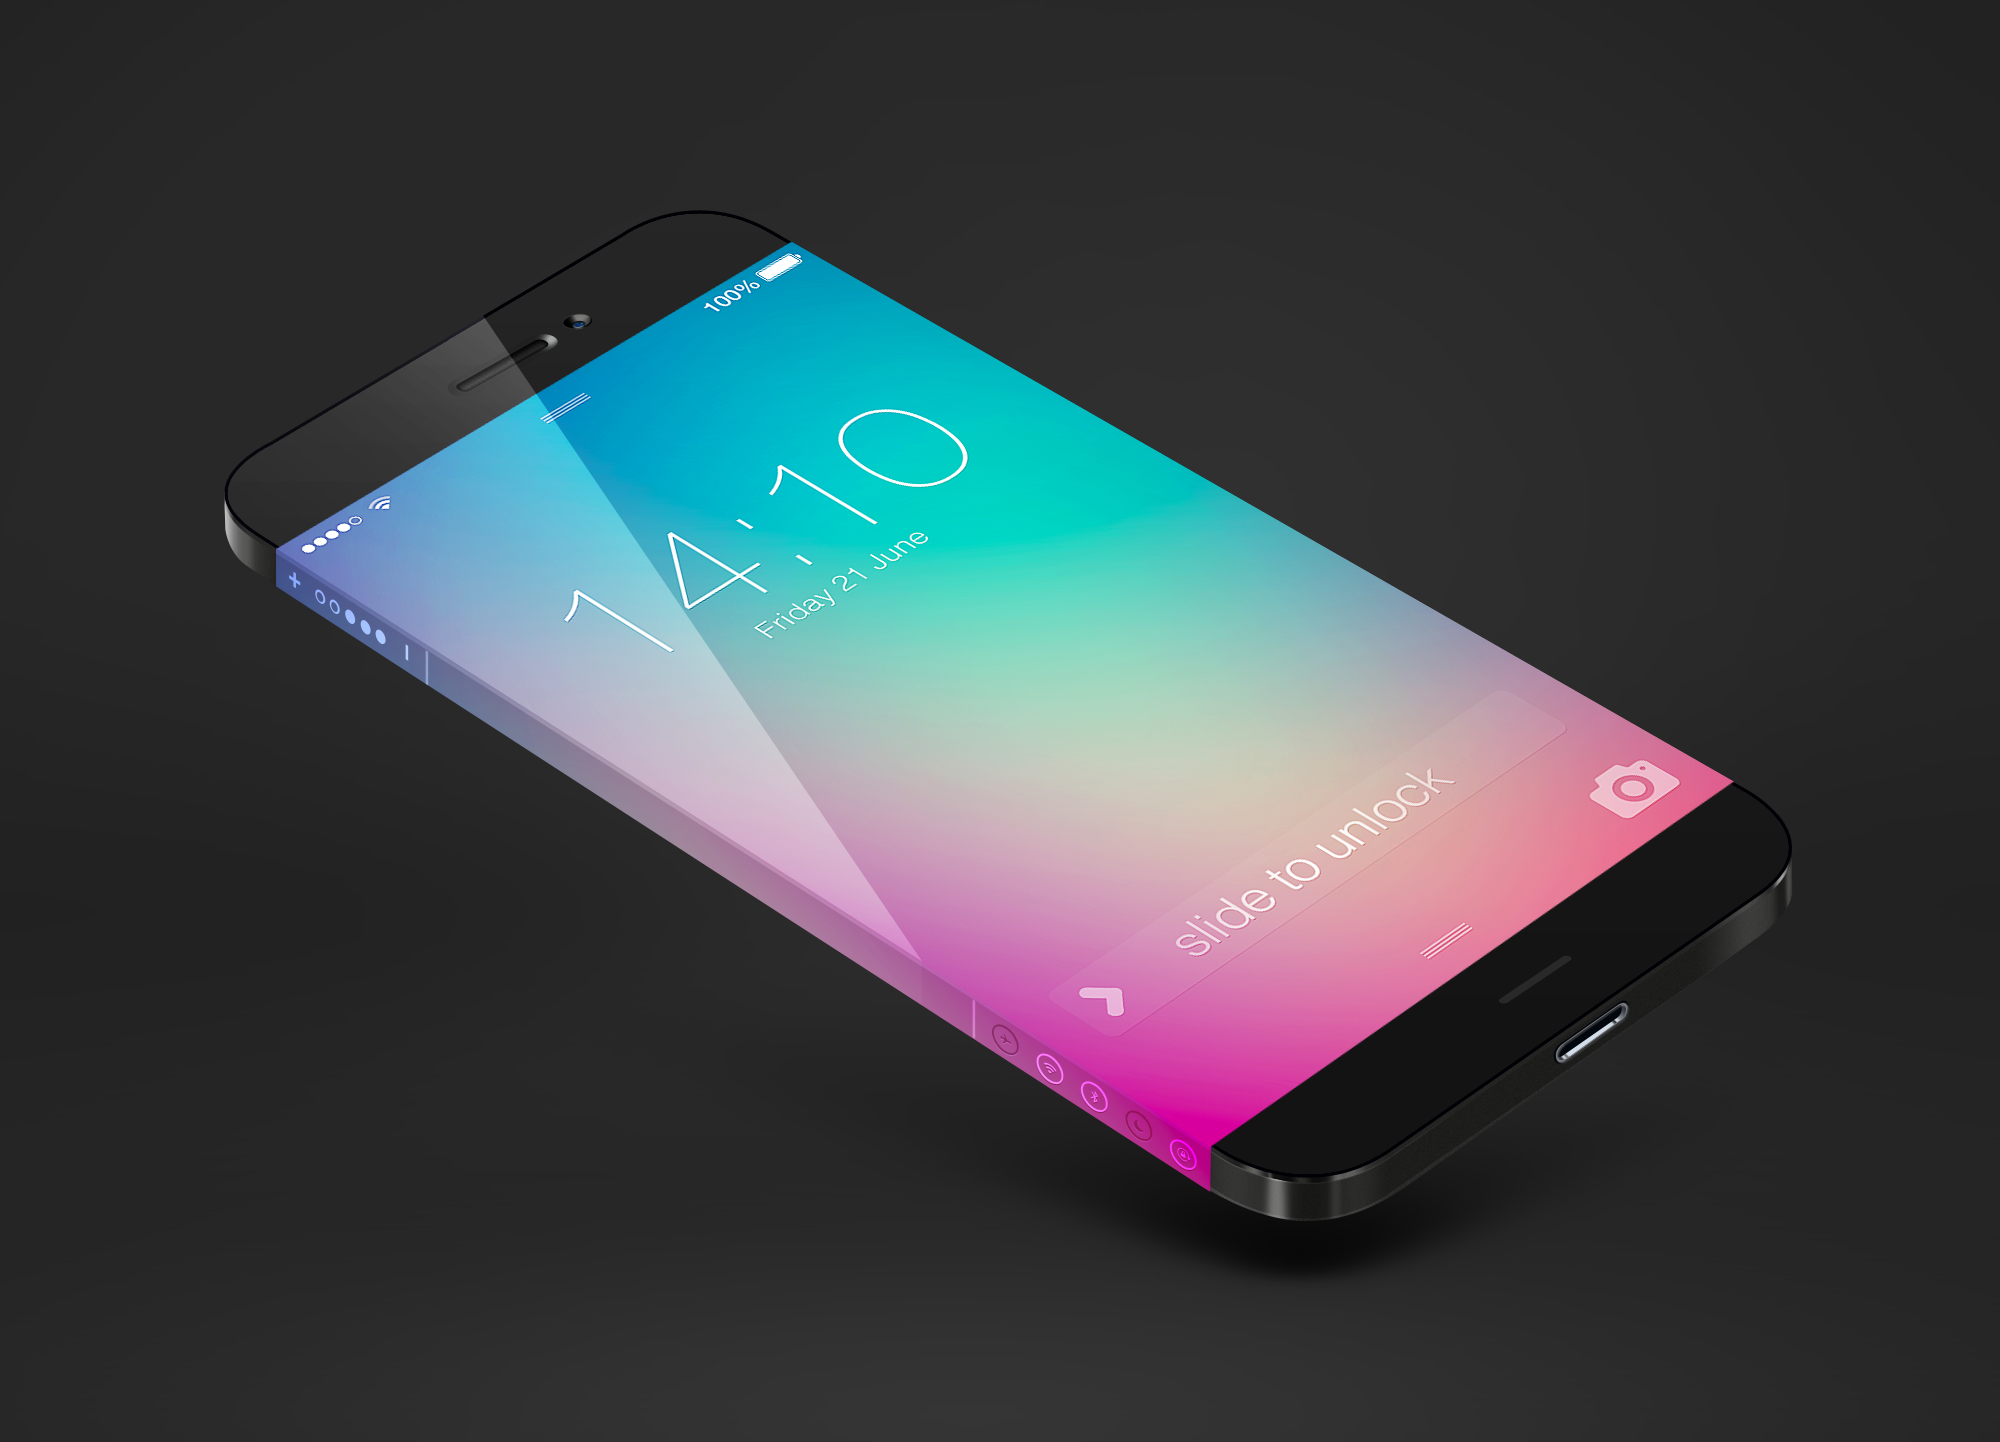 Design In Apple iPhone Concept Wallpaper And Image